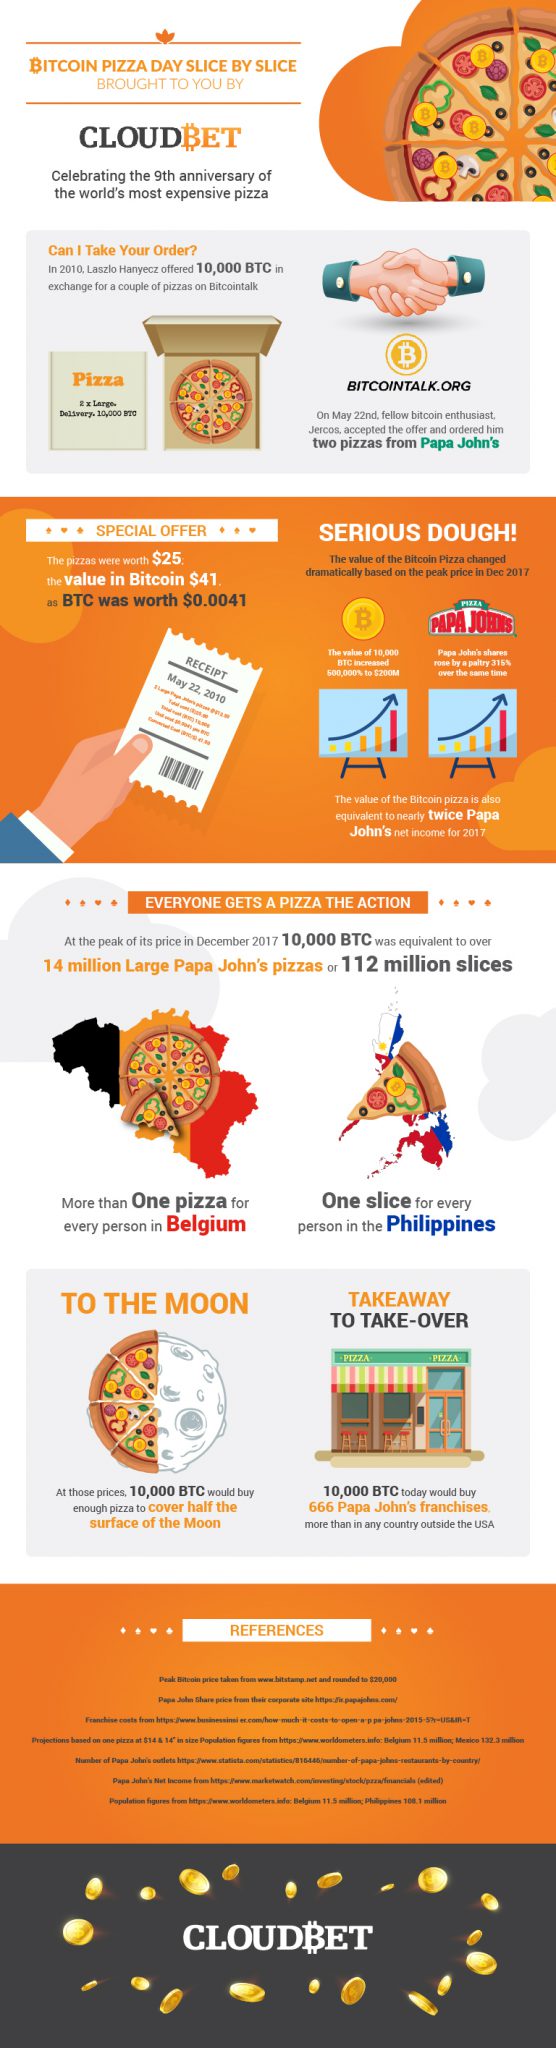 Bitcoin Pizza Day Infographic